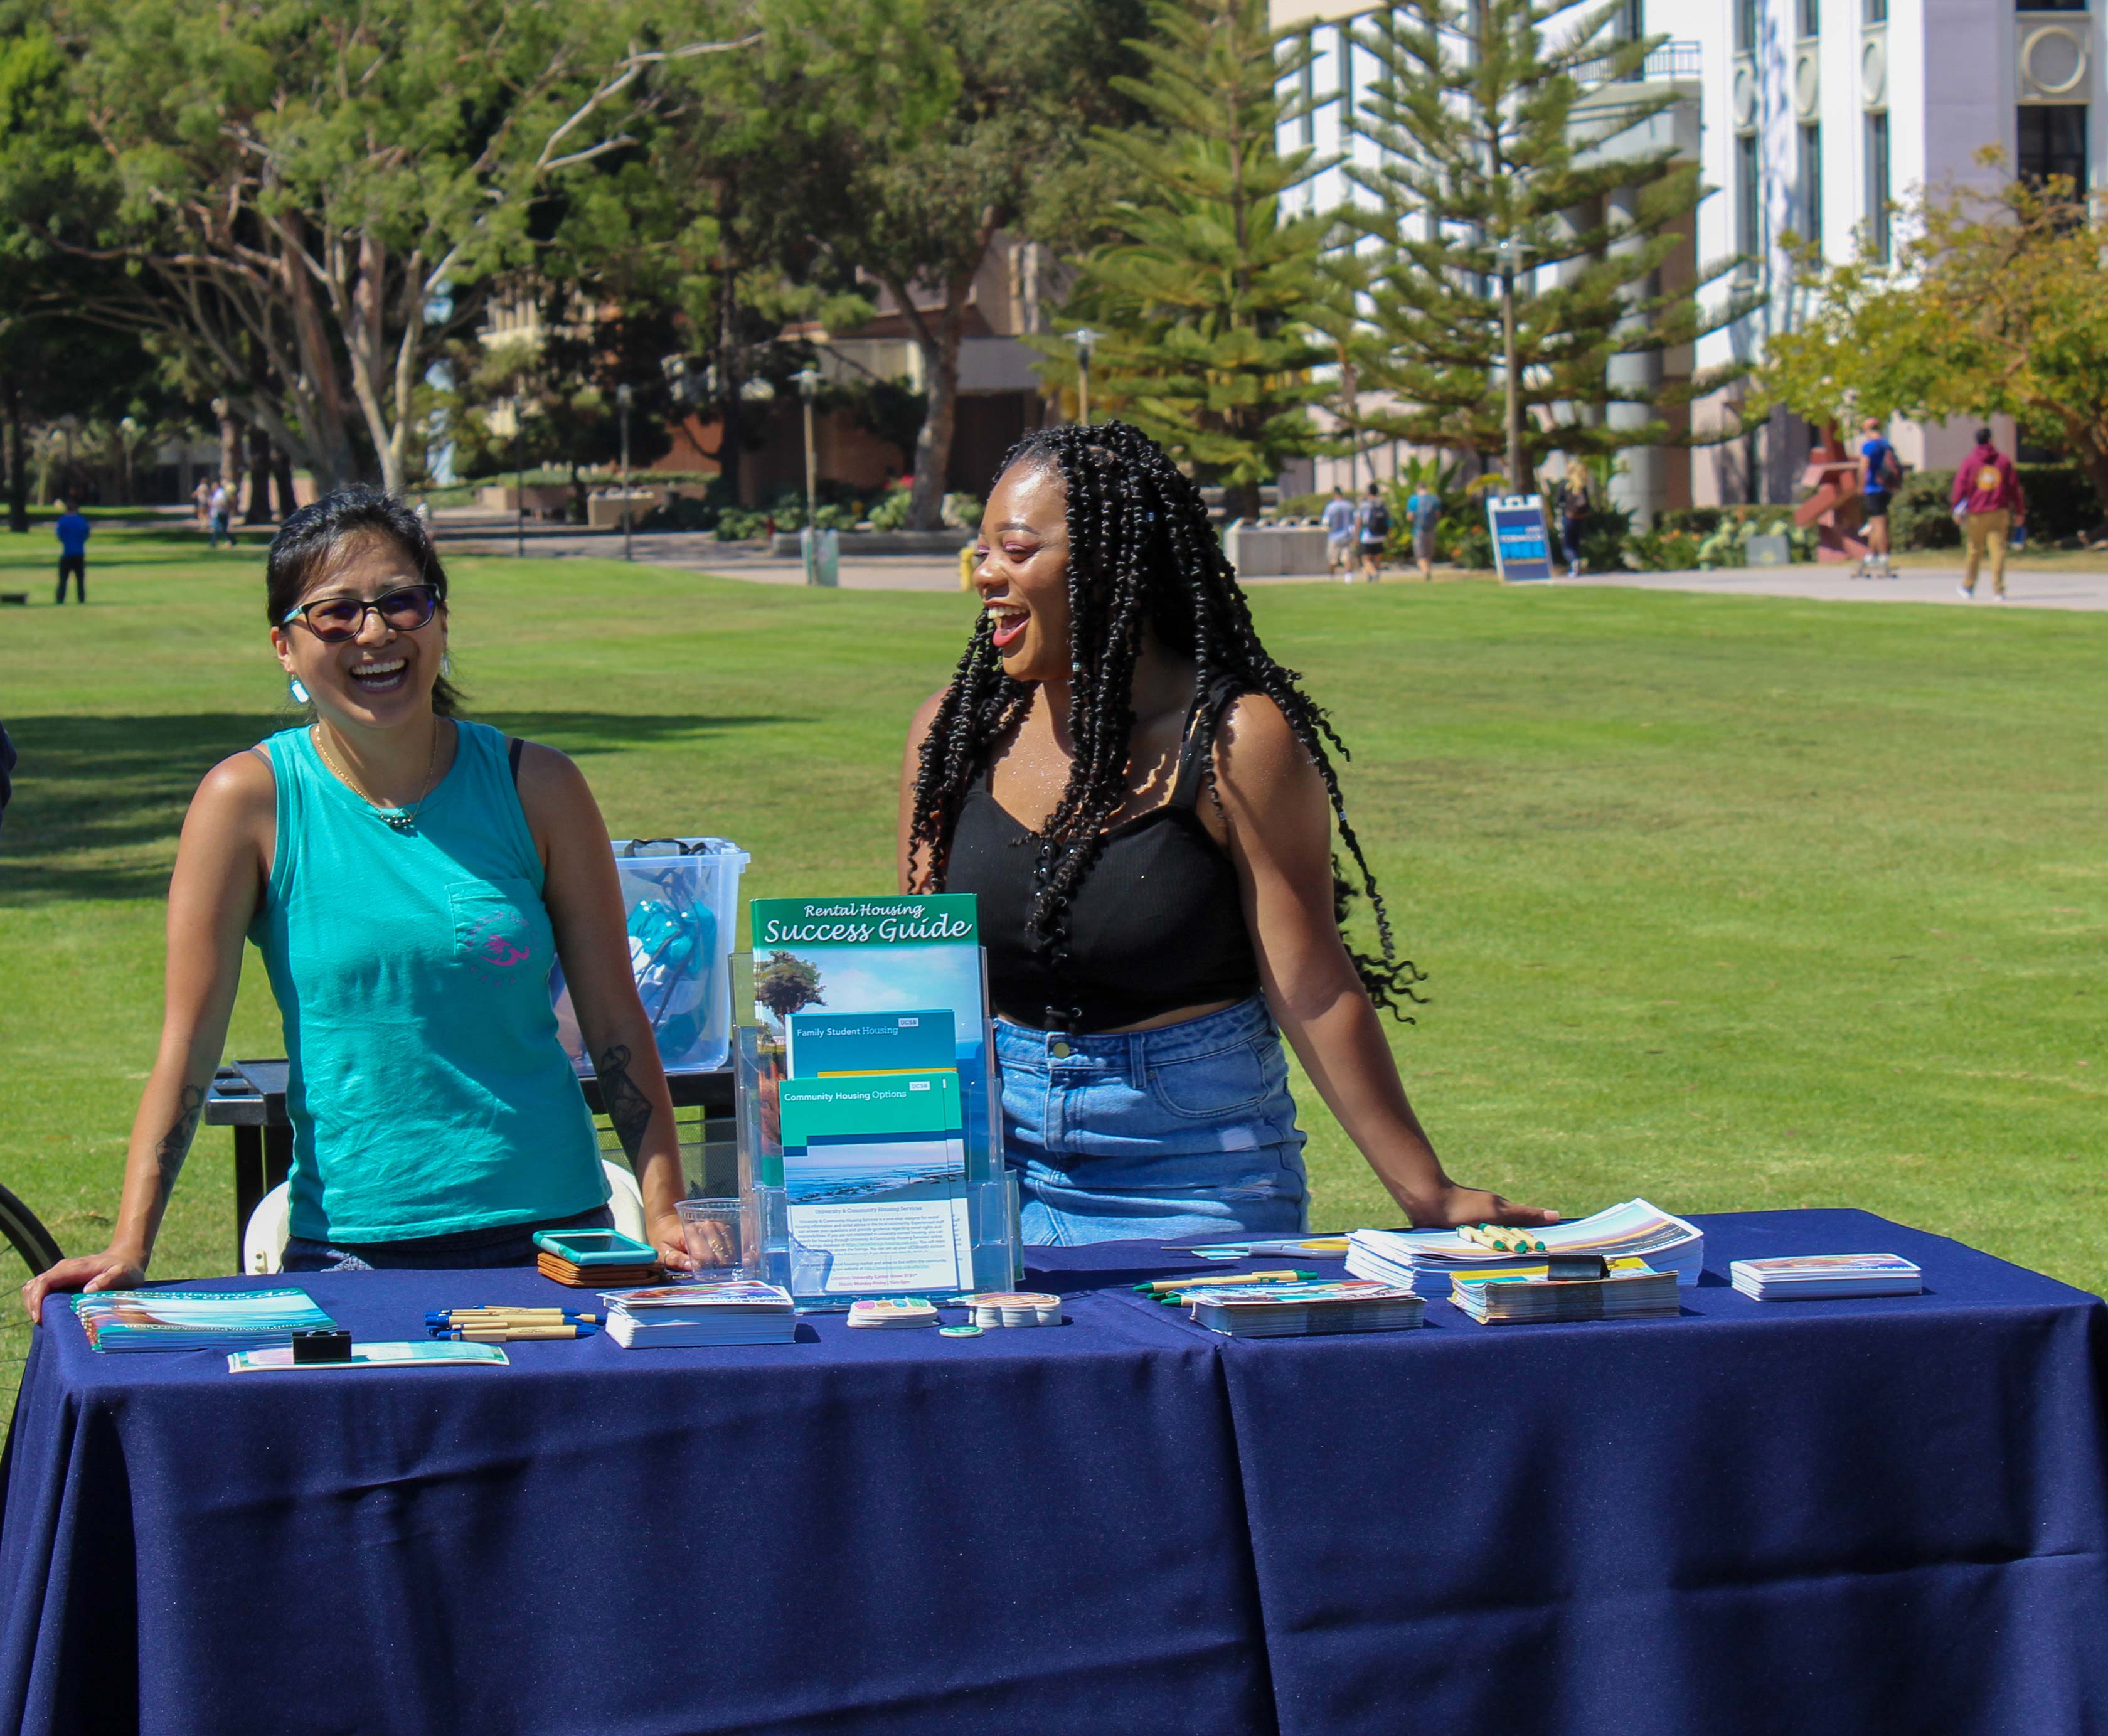 Female students standing behind Success Stories booth